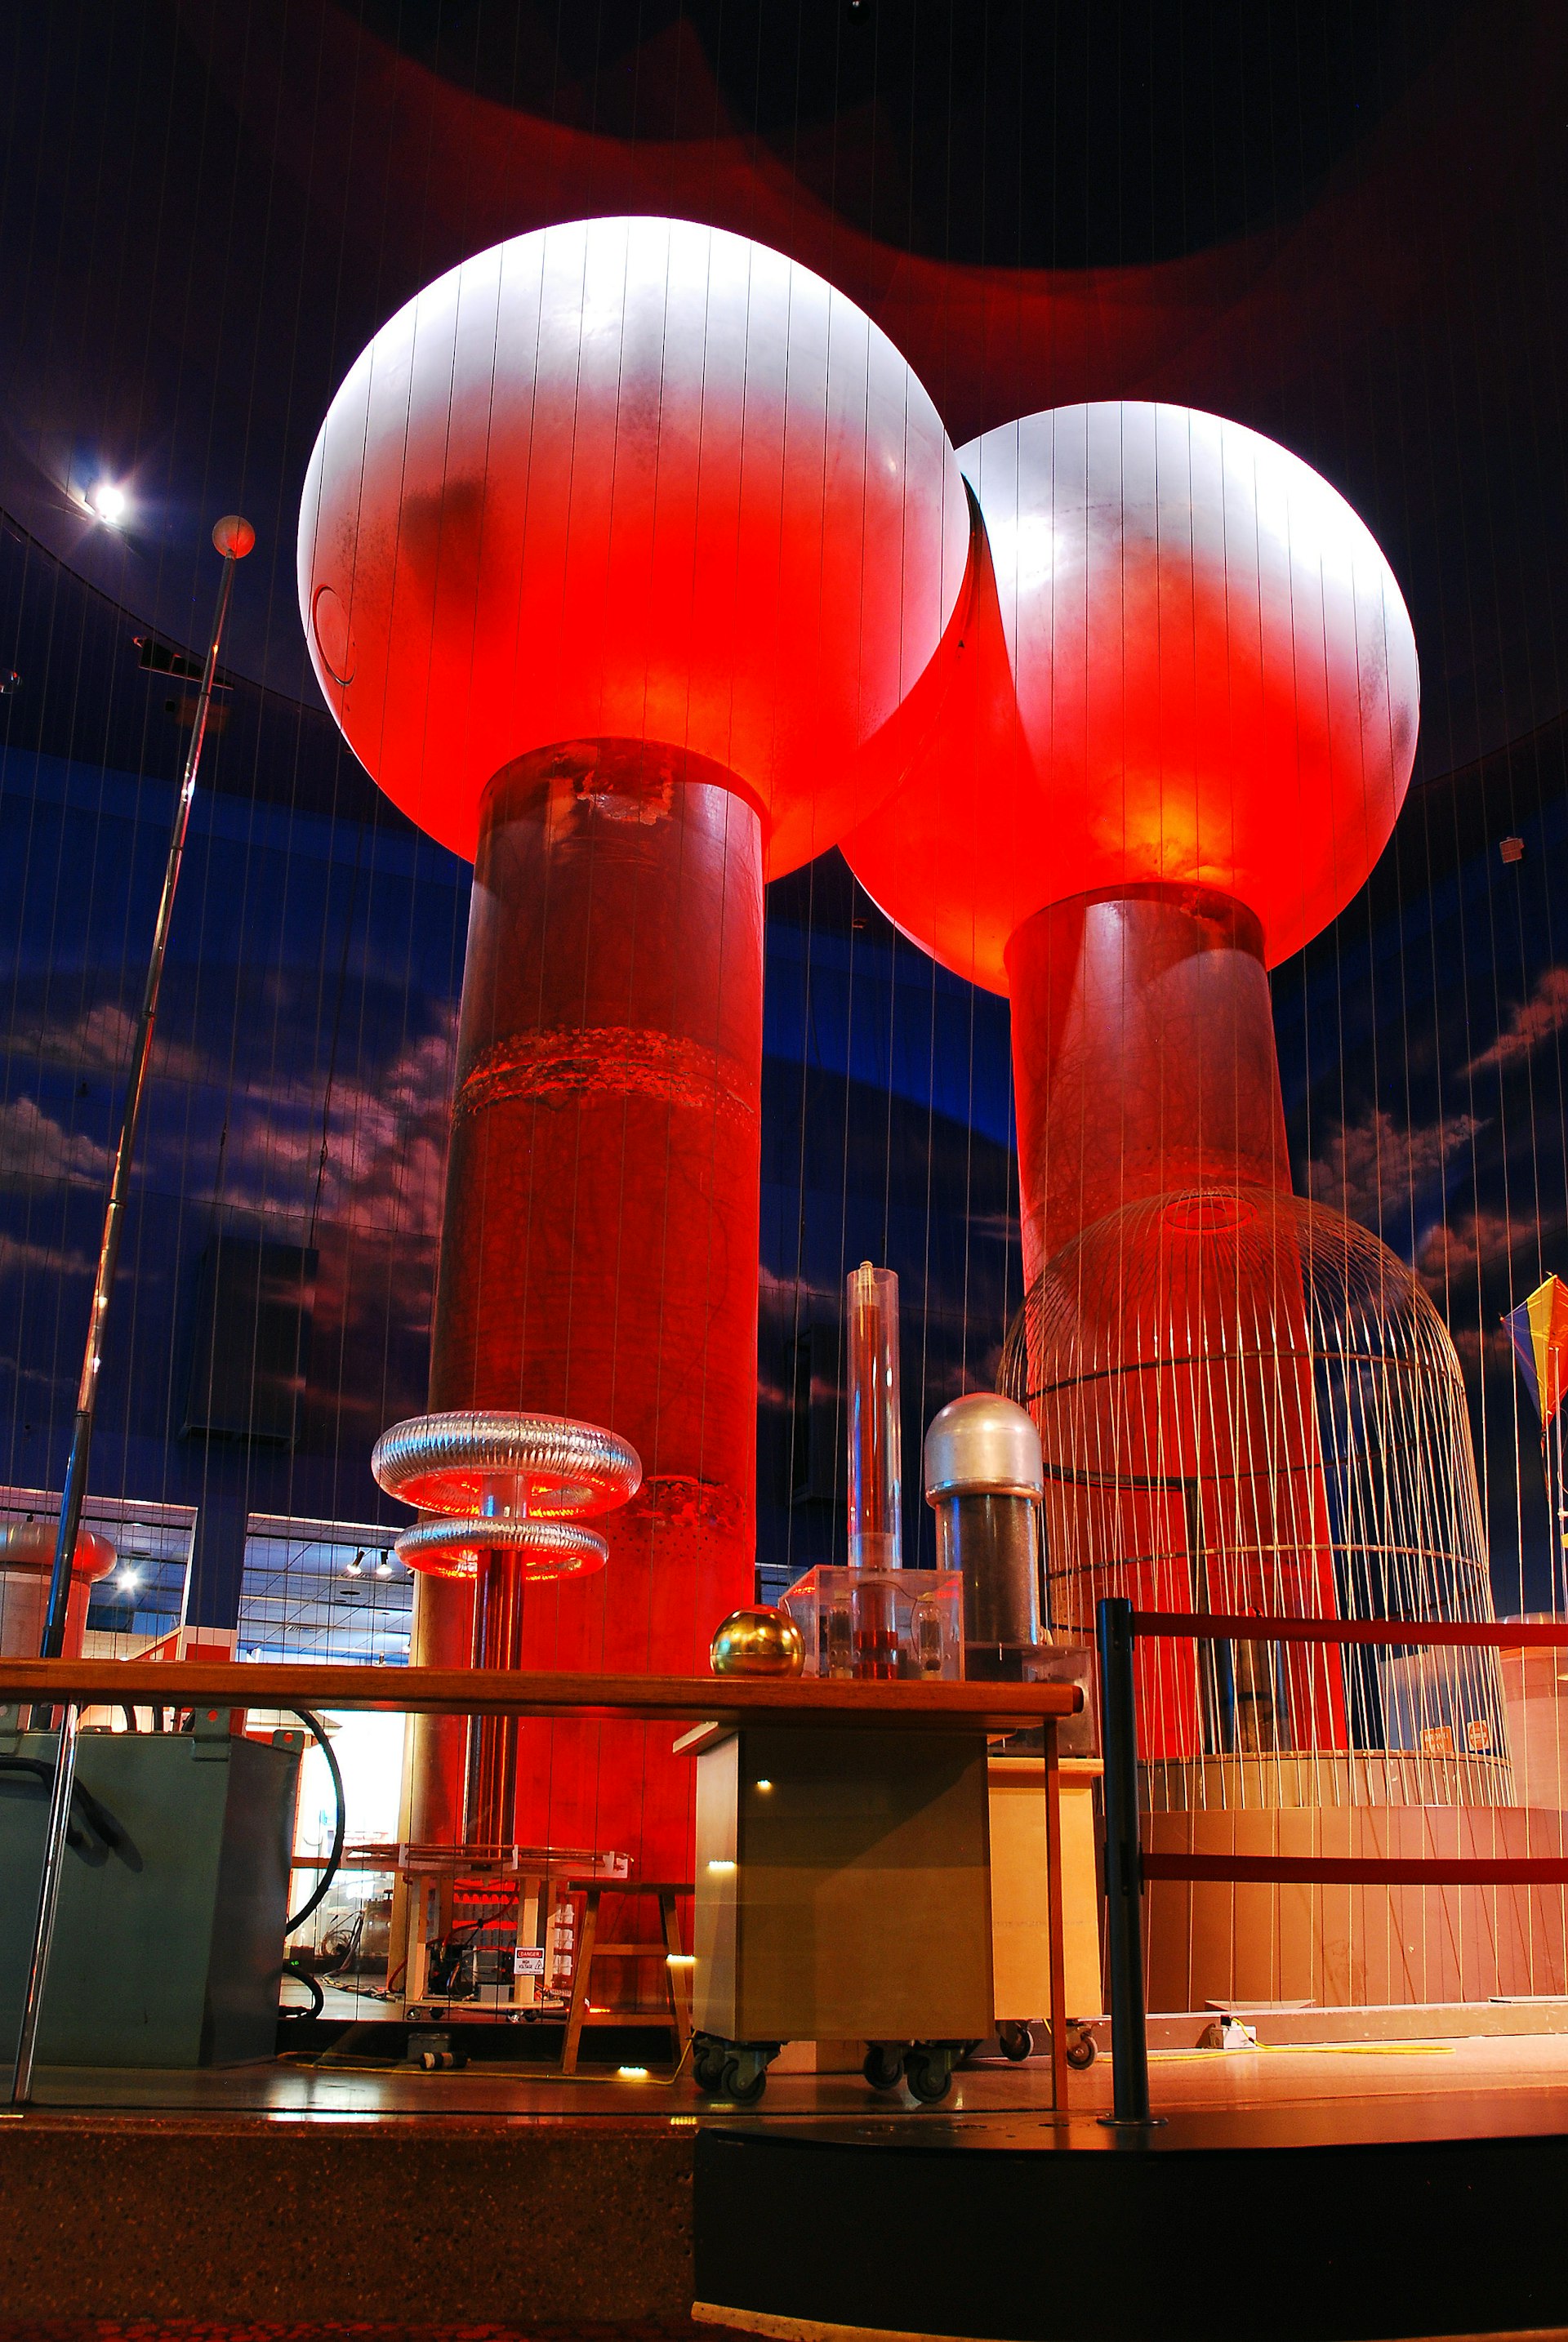  A large Van der Graaf generator thrills visitors at the Boston Science Museum demonstrating the power of electricity